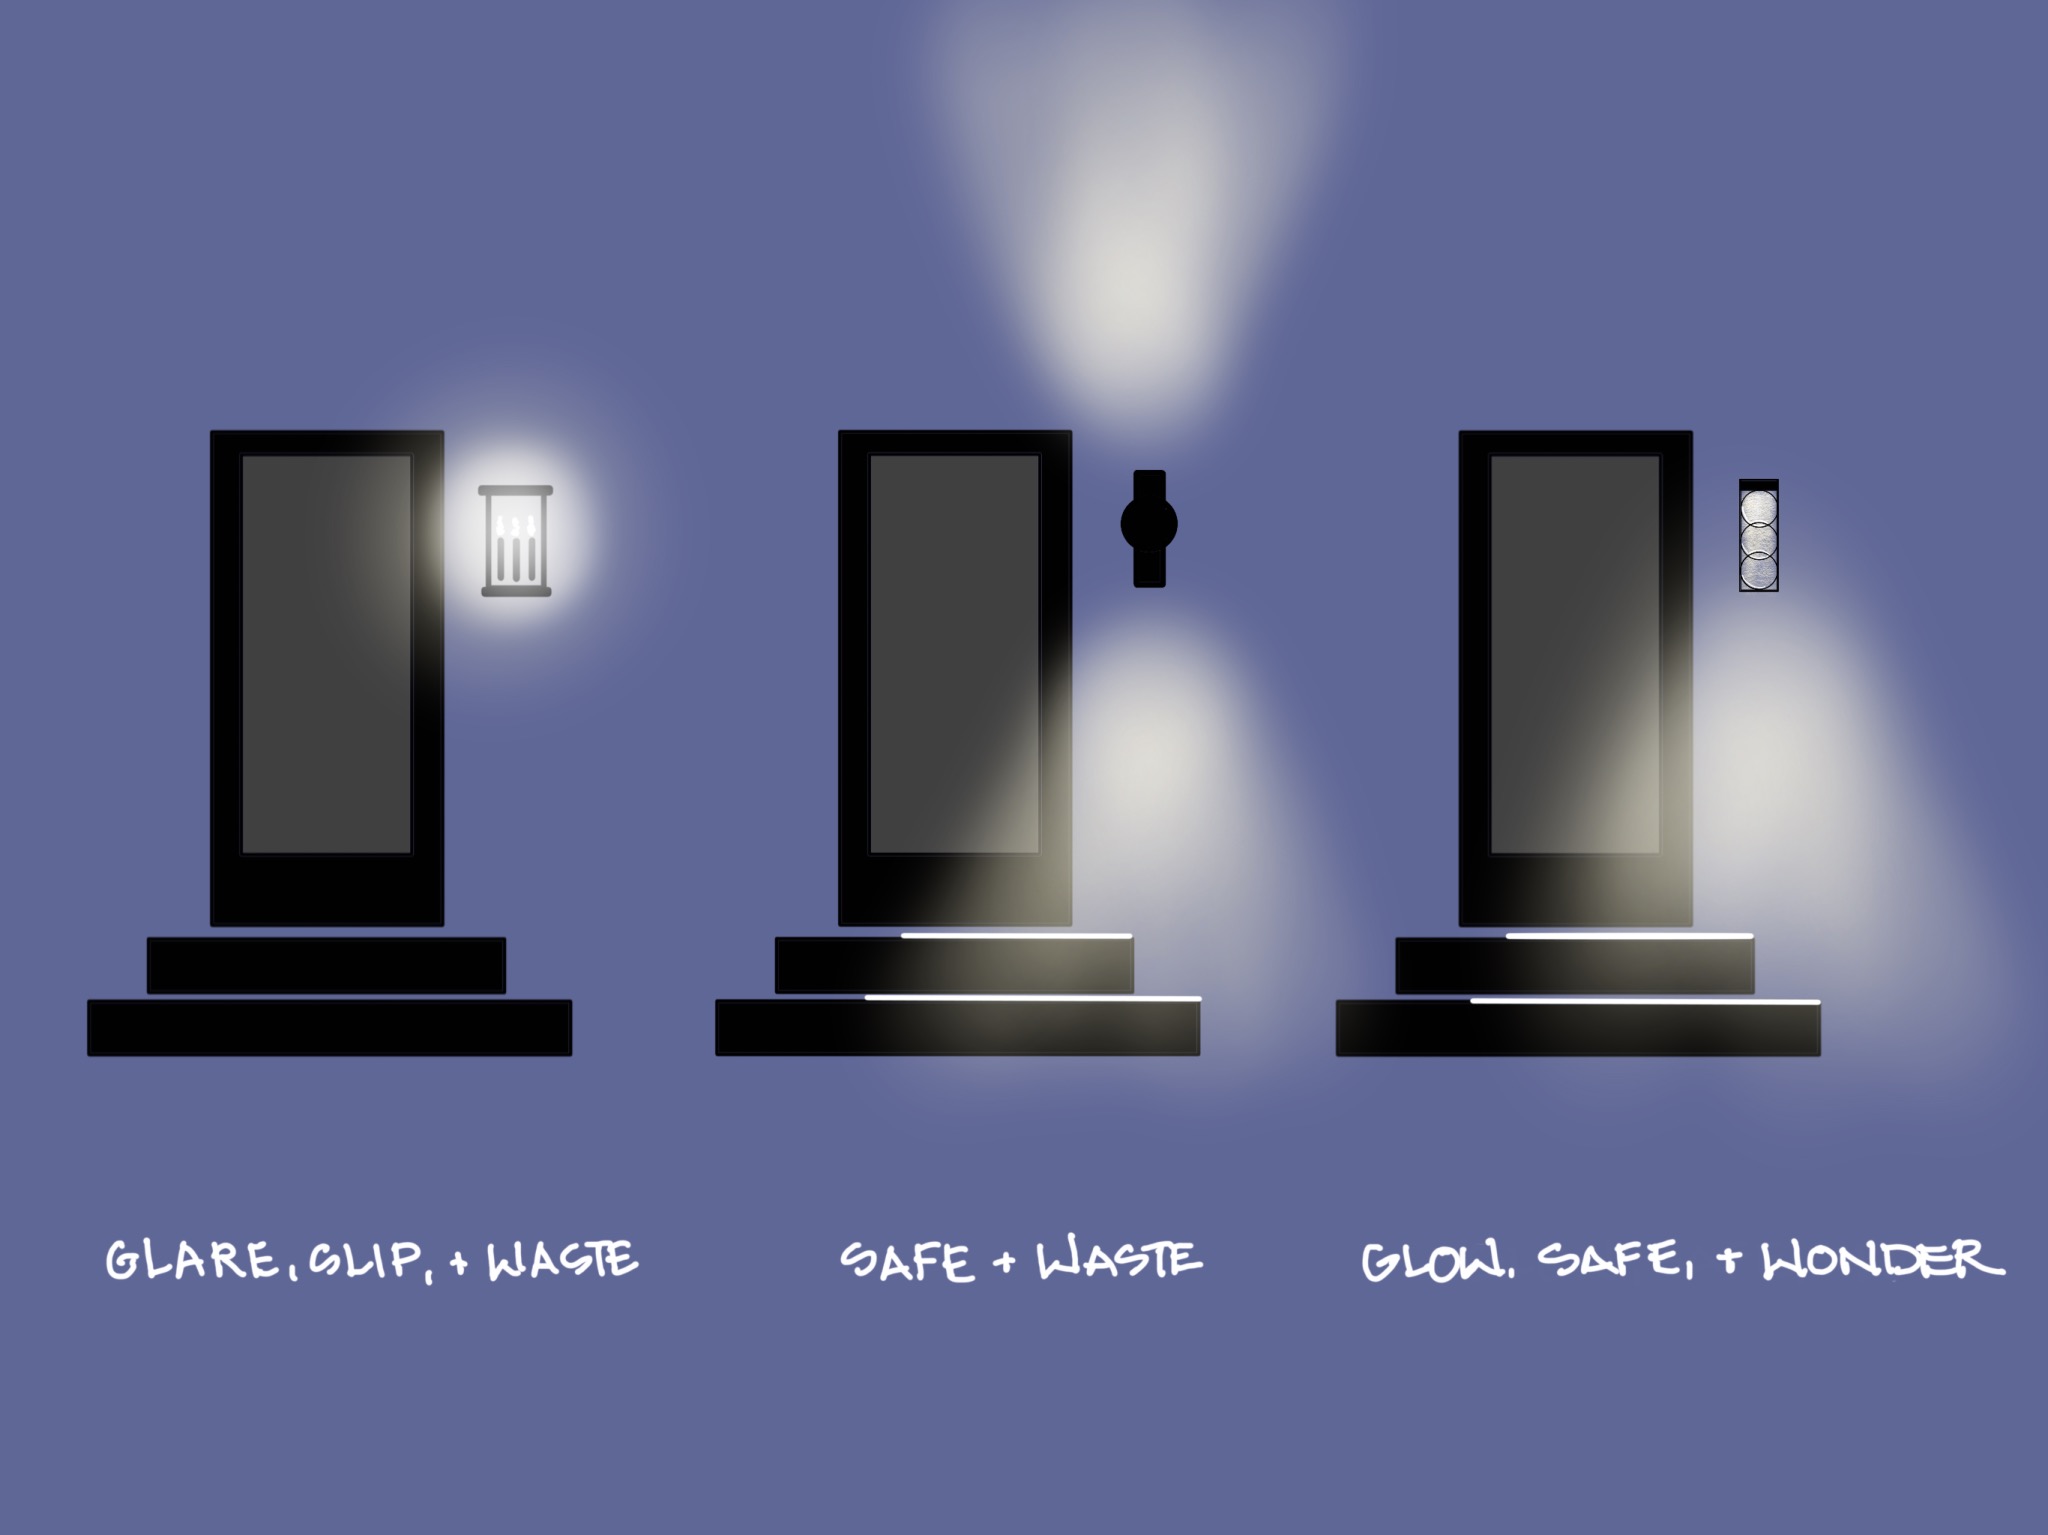 three doors demonstrating three styles of porchlights. The first is a standard light, described as "Glare, Slip, & Waste." The second is a lantern with light shooting out the top and bottom, described as "Safe & Waste." The third is a modified version of the first with most of the light directed downwards to the path. This is described as "Glow, Safe, & Wonder."